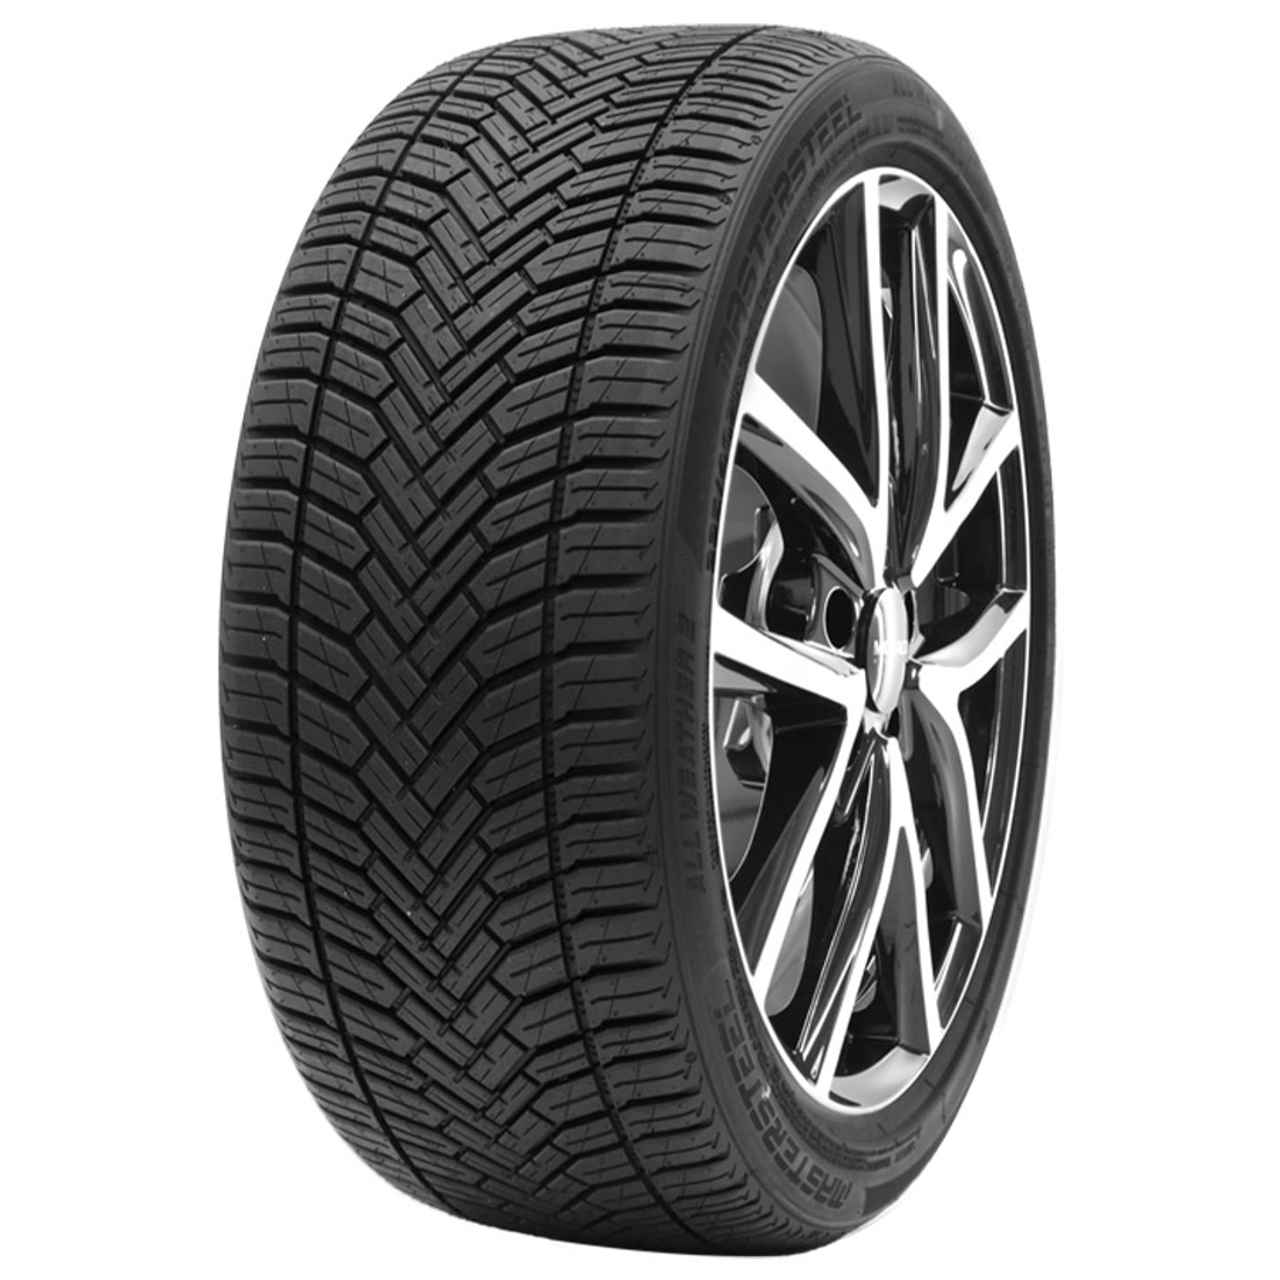 MASTERSTEEL ALL WEATHER 2 165/70R14 81T BSW